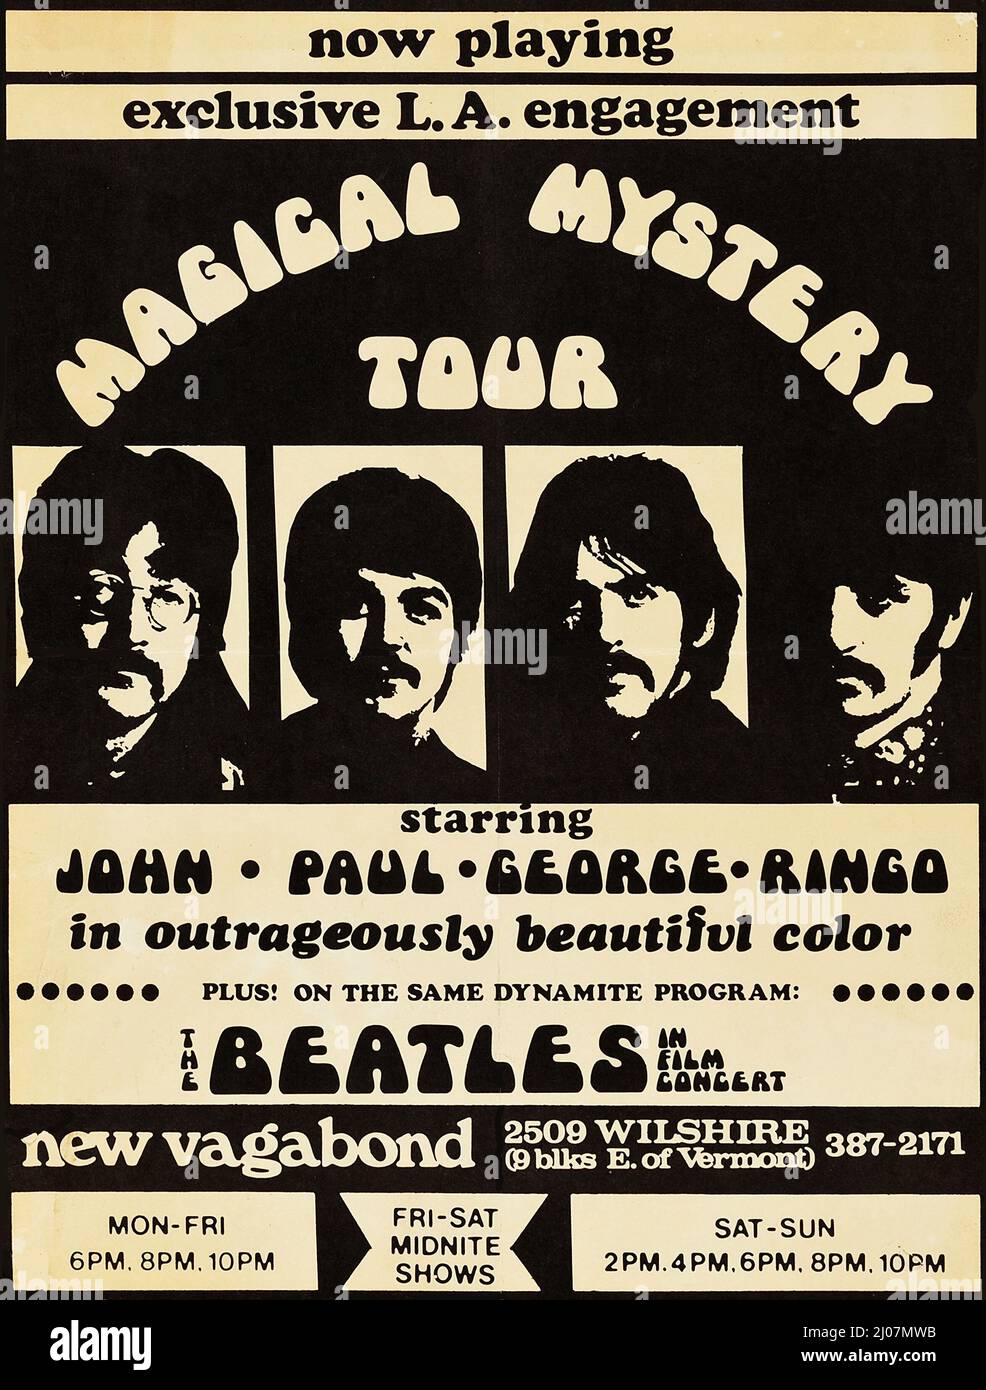 Beatles Los Angeles Magical Mystery Tour at the New Vagabond Theatre. Museum: PRIVATE COLLECTION. Author: ANONYMOUS. Stock Photo